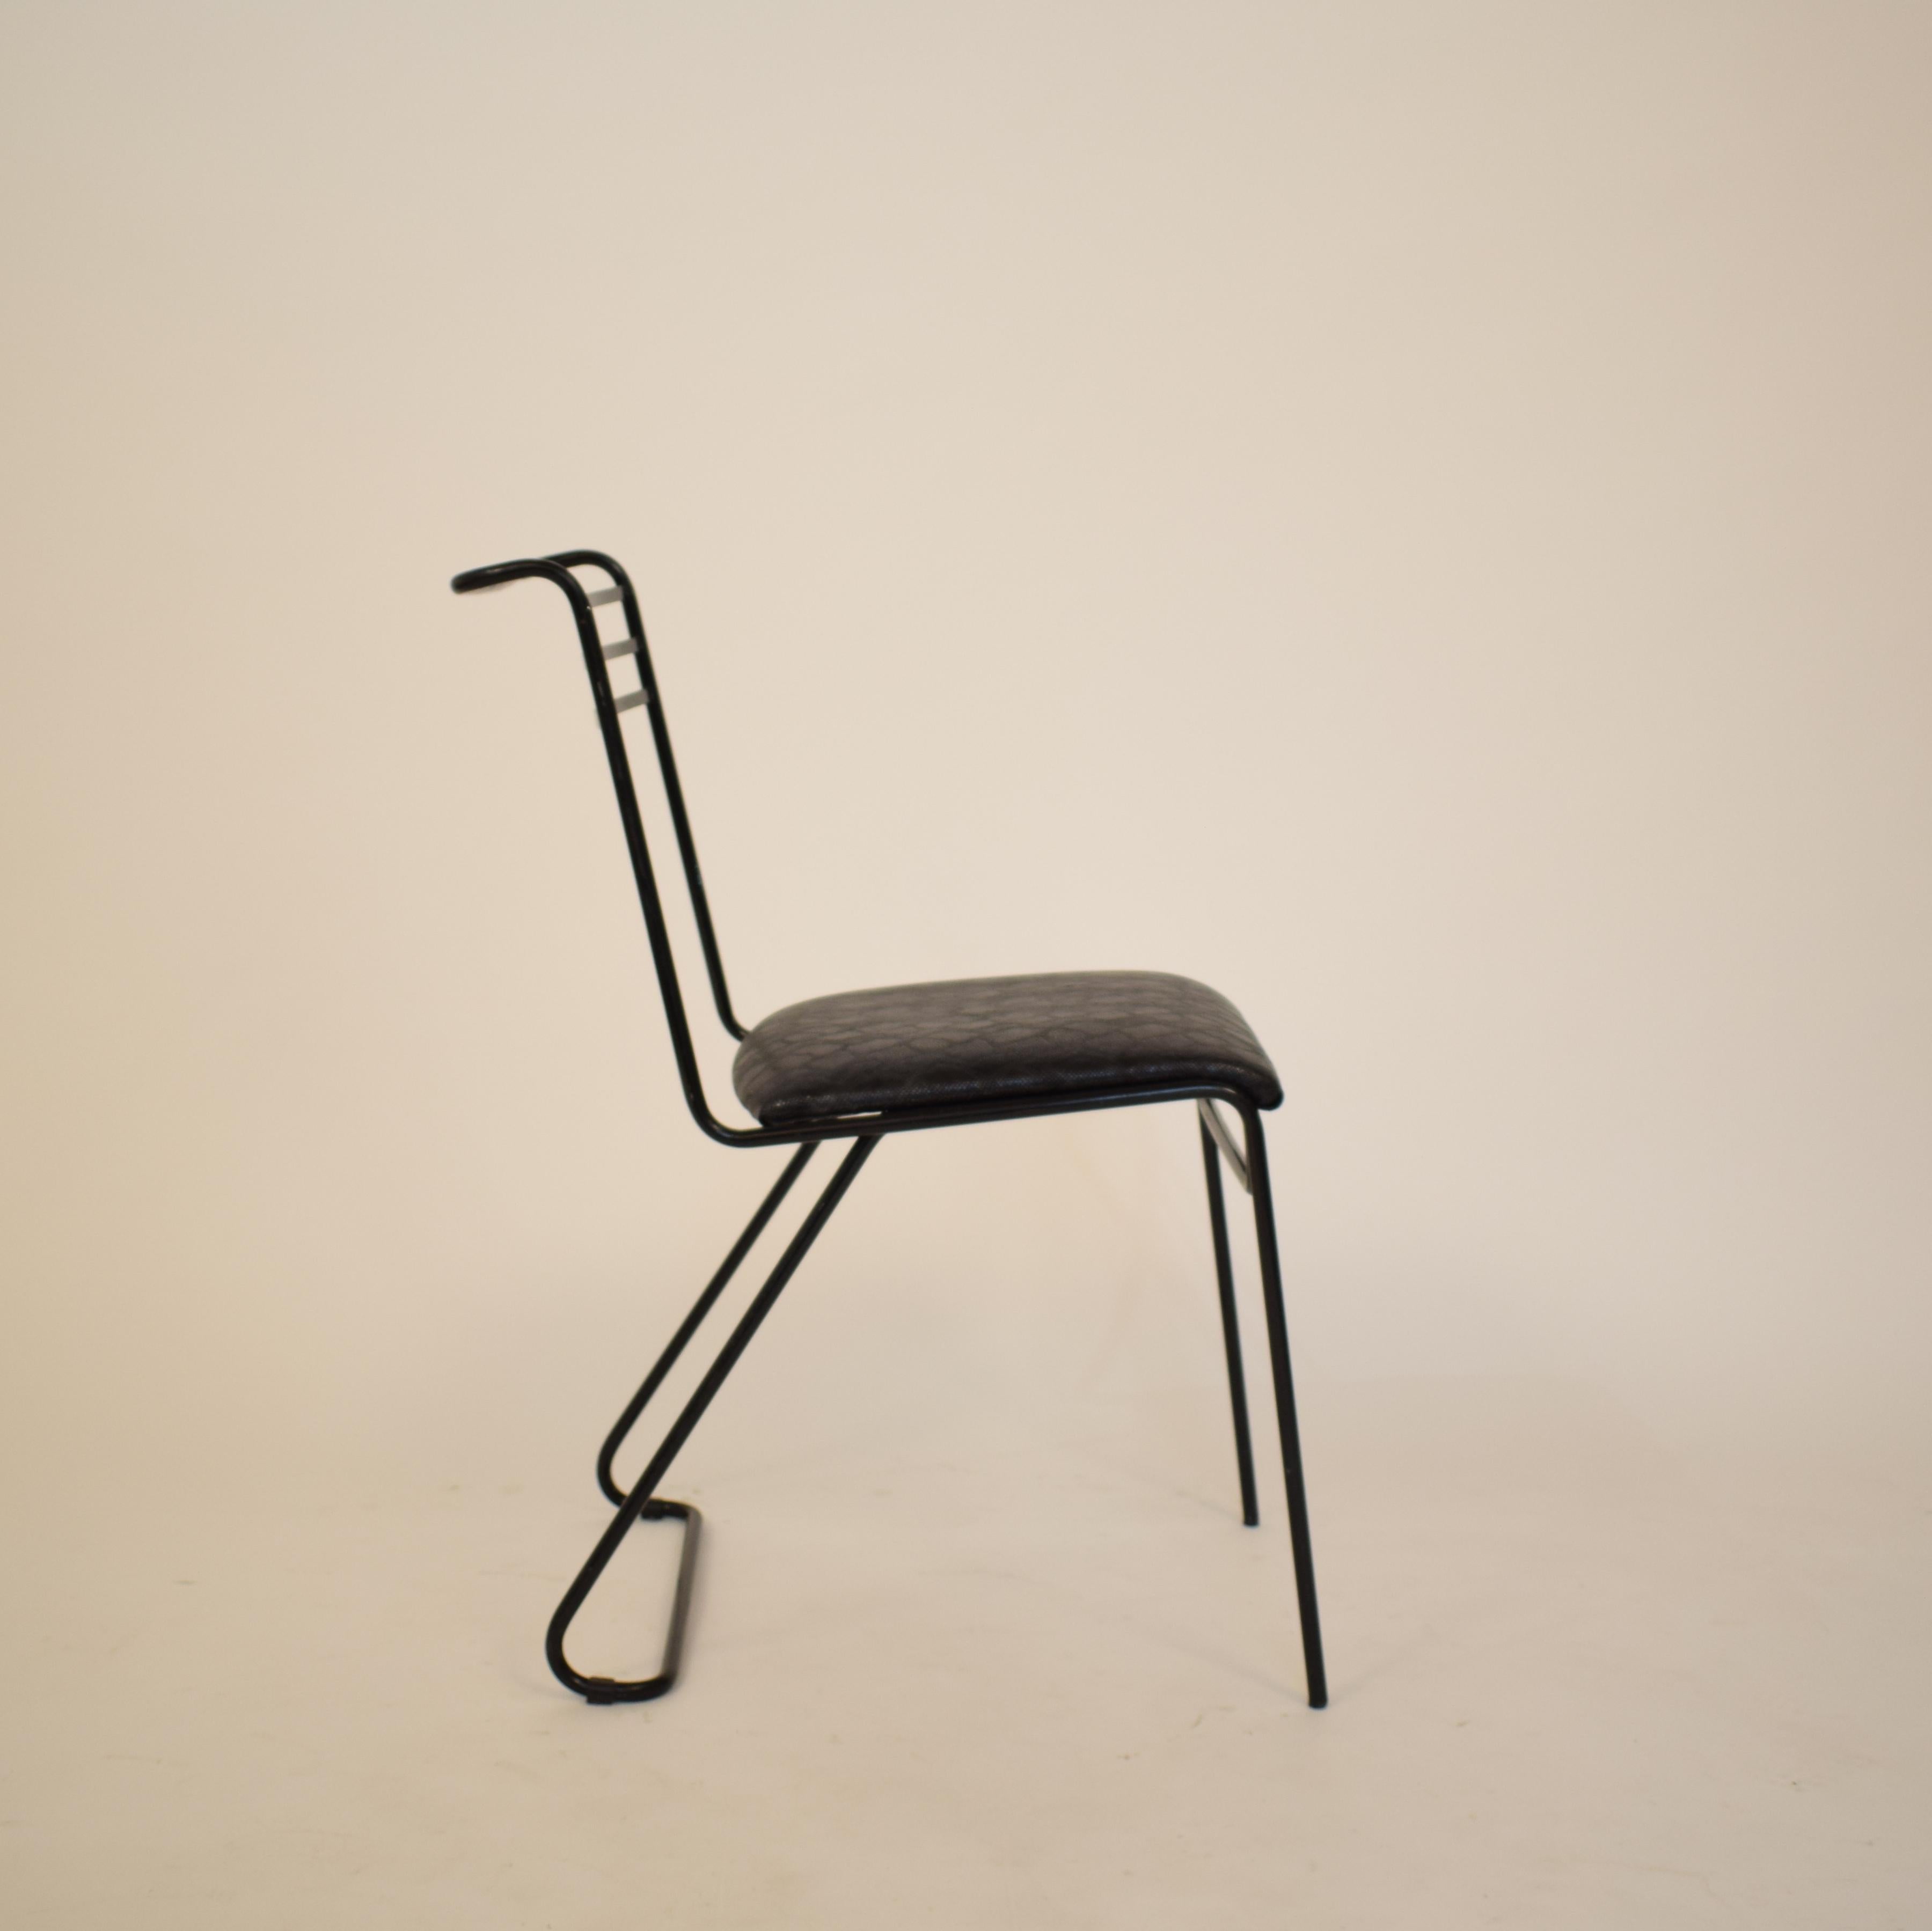 1980 Italian Midcentury / Memphis Black Lacquered Metal Chair with Leather Seat 5